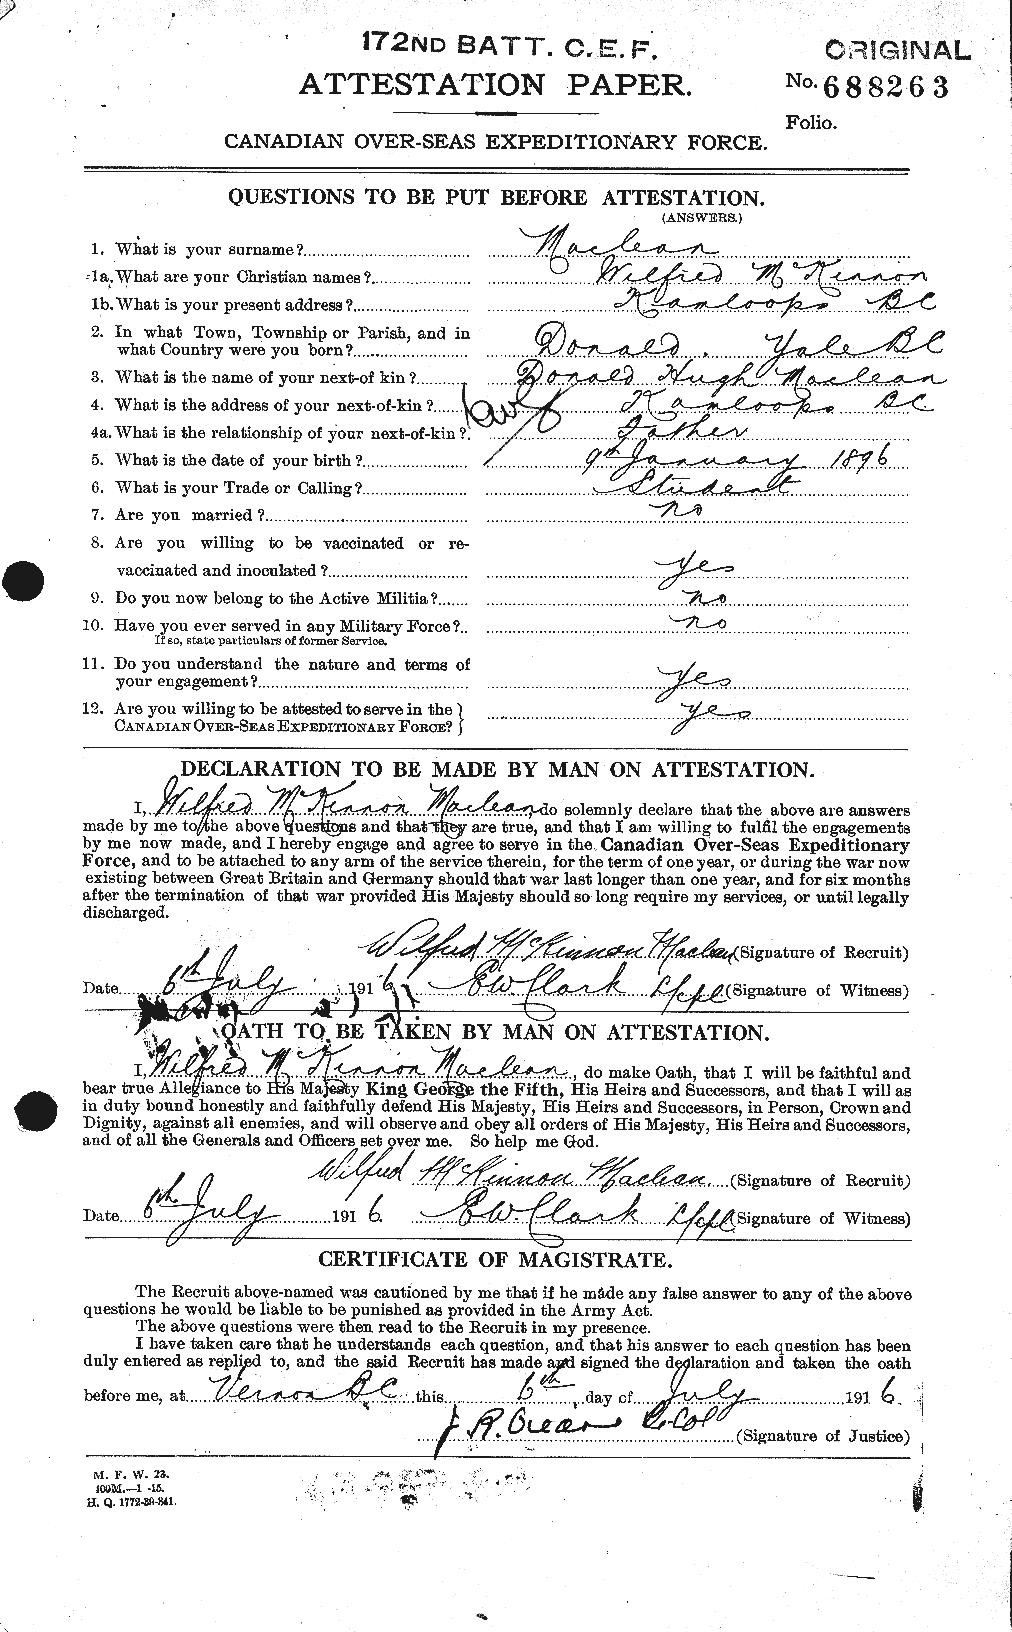 Personnel Records of the First World War - CEF 535171a